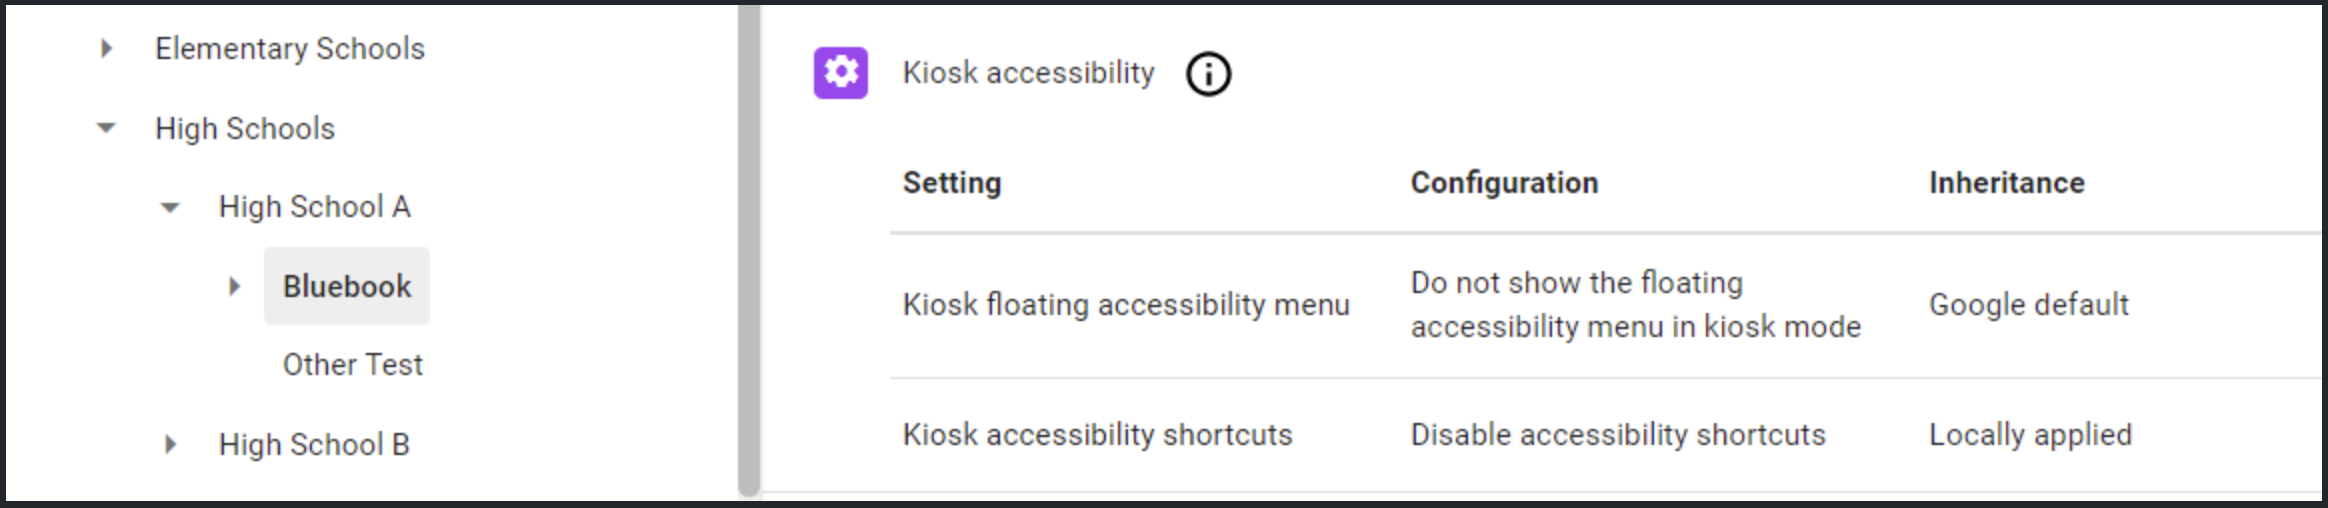 Figure 1 is a screenshot showing the Google admin console for High School A. Two organizational units are shown, Bluebook and Other Test. The Bluebook organizational unit is configured to hide the floating accessibility menu in kiosk mode and disable accessibility shortcuts.